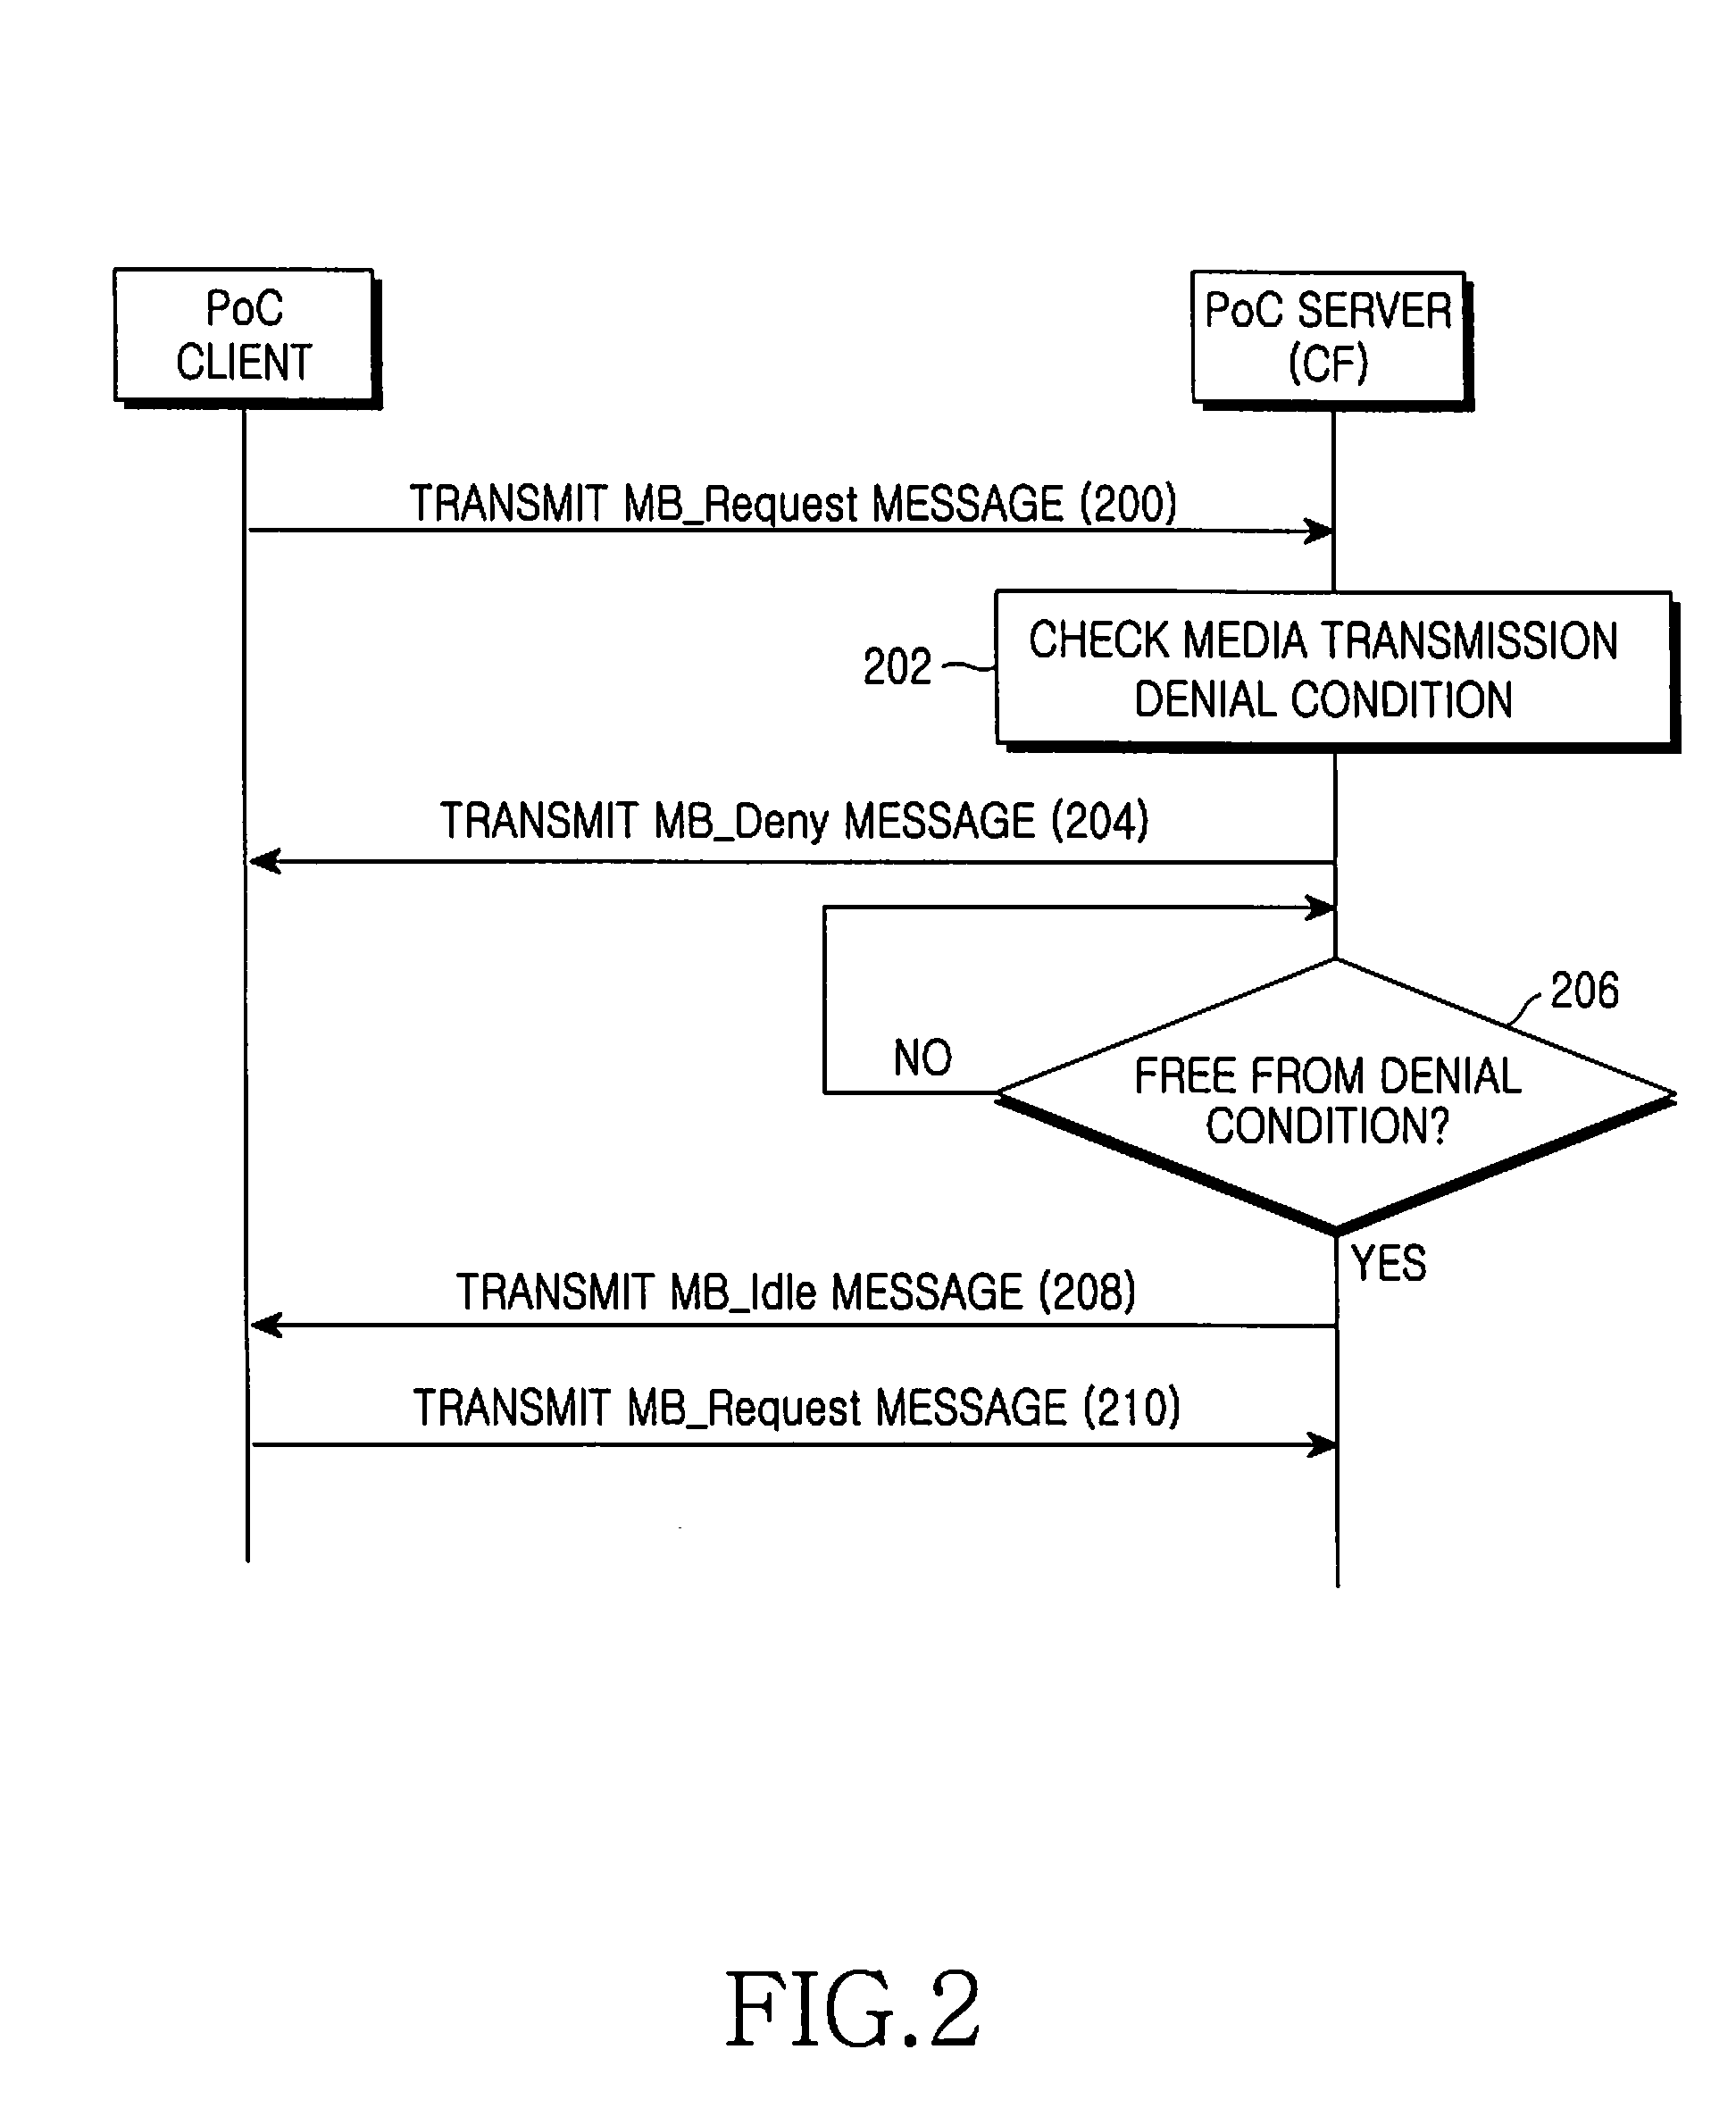 METHOD AND SYSTEM FOR REQUESTING AND GRANTING PoC USER MEDIA TRANSMISSION RIGHT